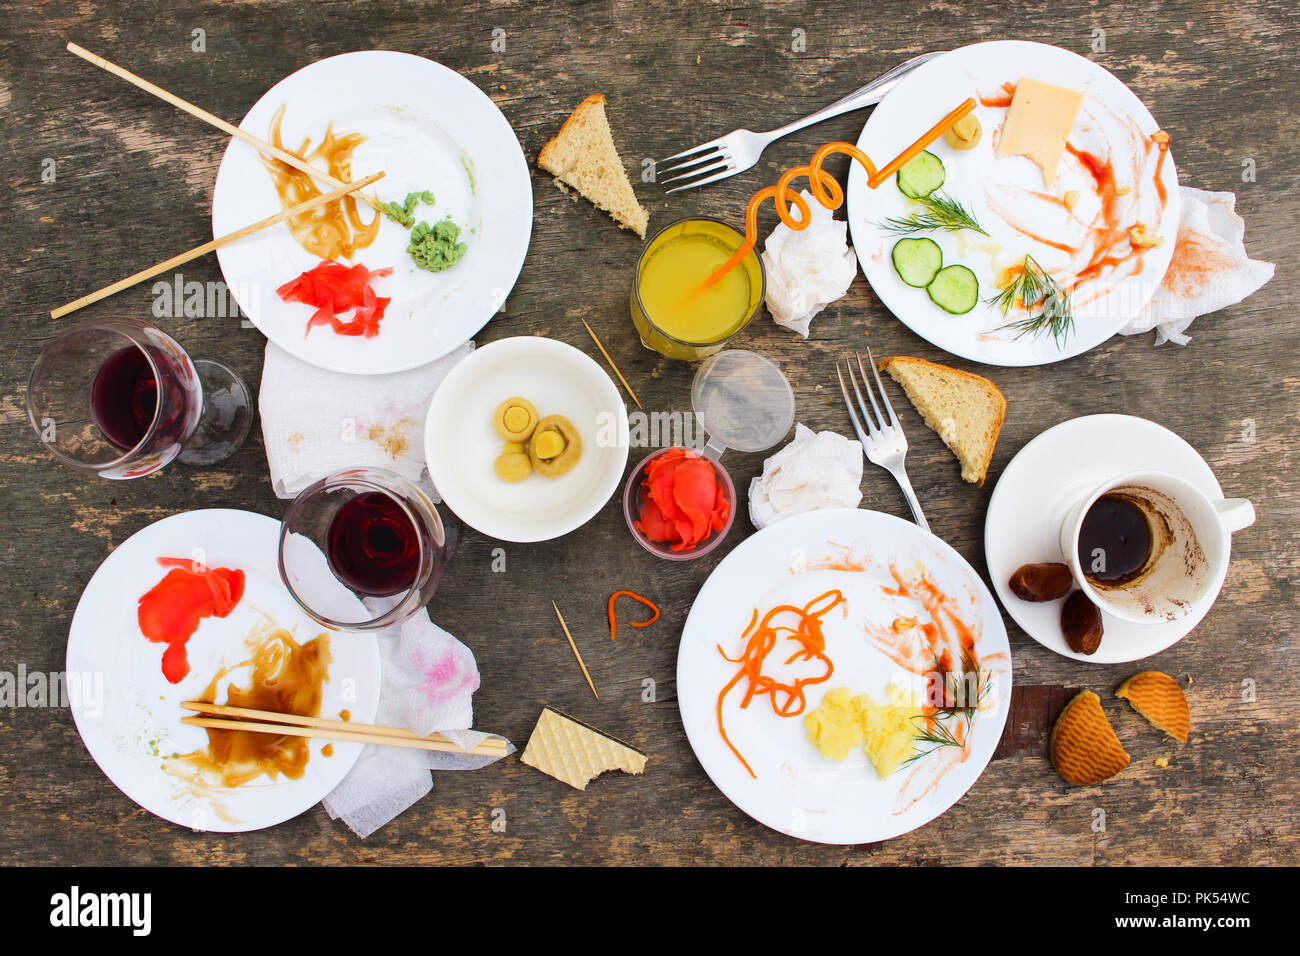 Messy table after party. Leftover food, spilled drinks, dirty dishes. Stock Photo